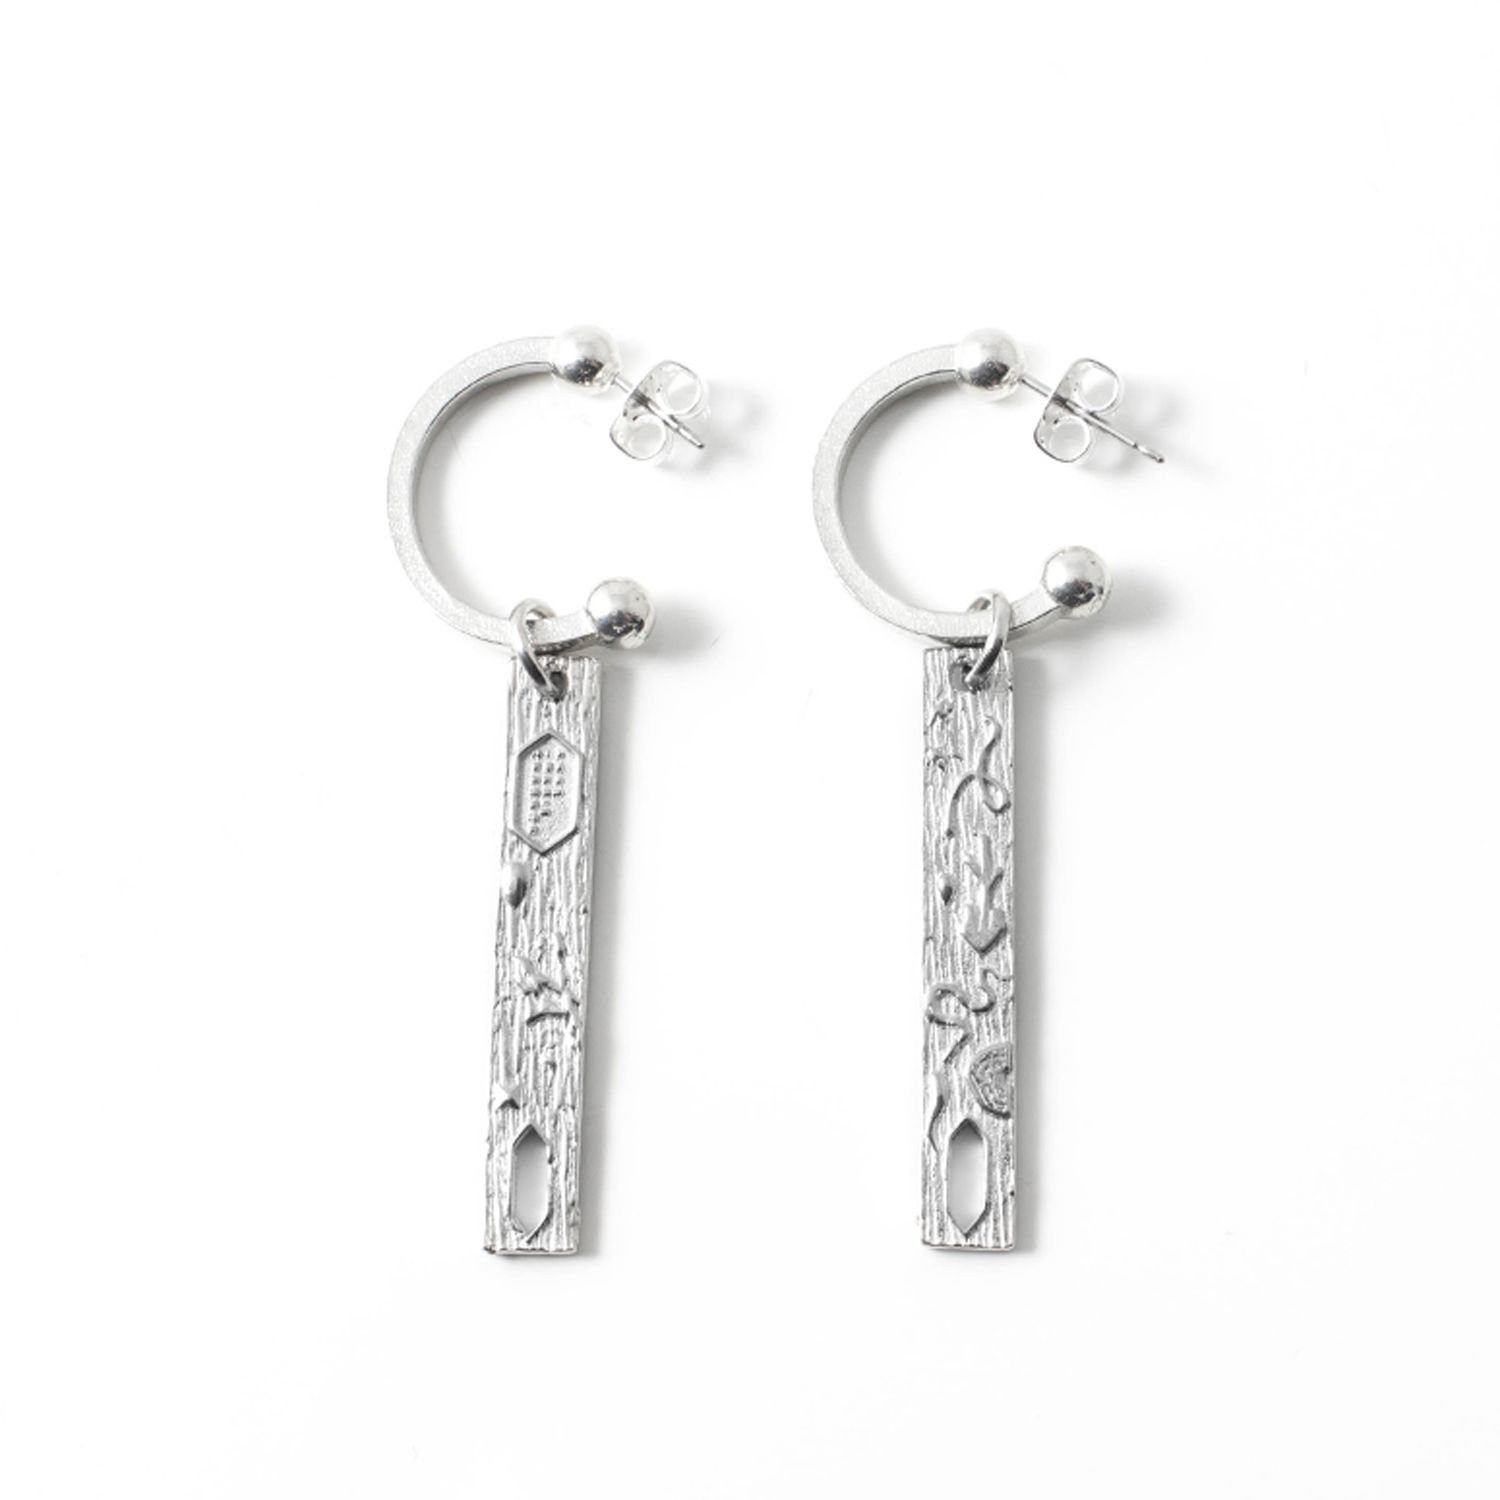 Anne-Marie Chagnon: Niagara Earrings Product Image 1 of 1